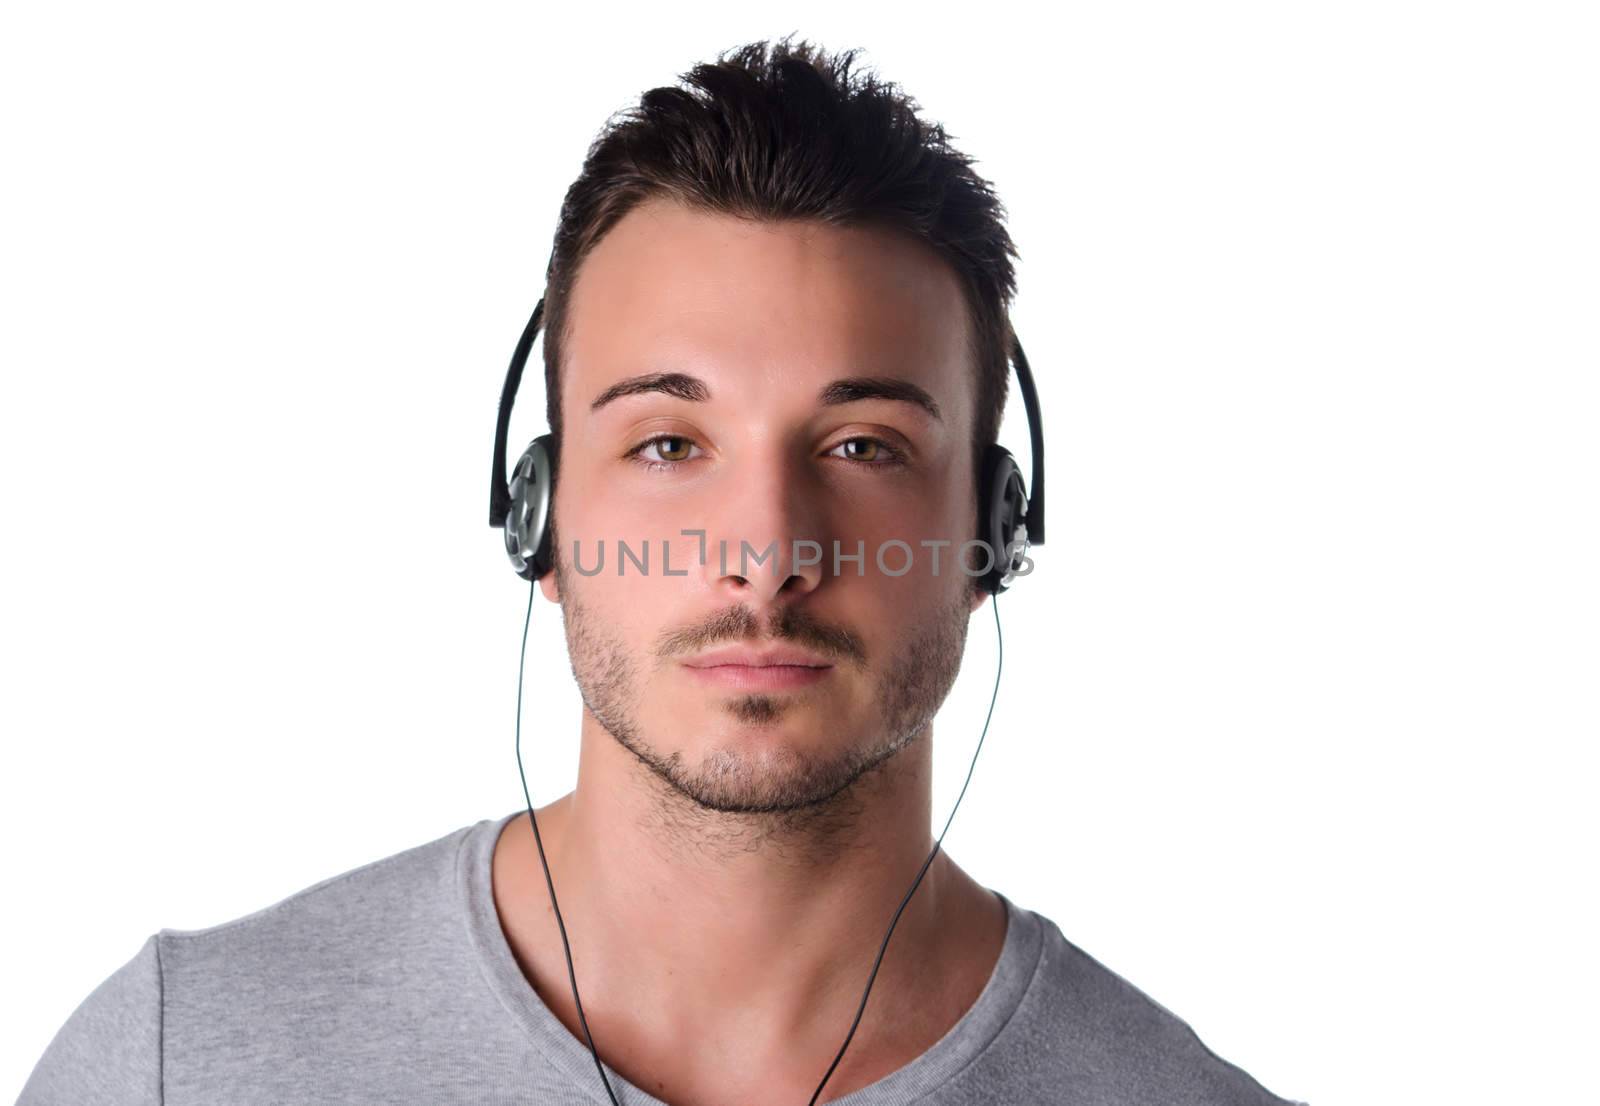 Good looking young man listening to music with headphones by artofphoto